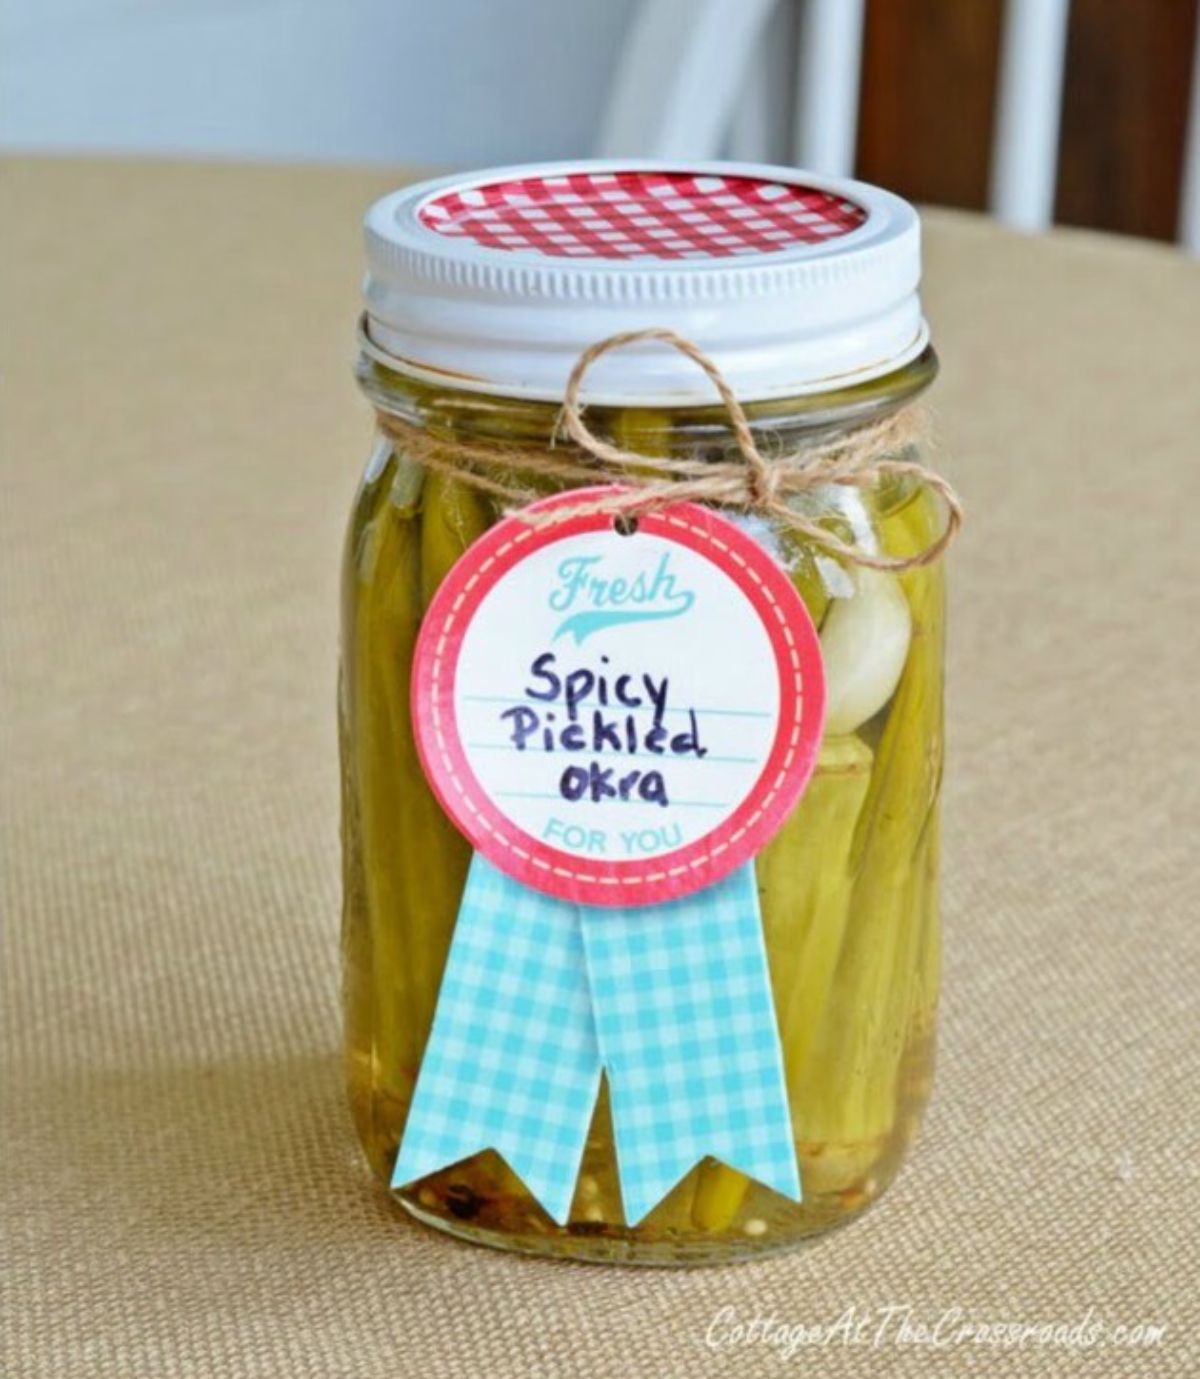 Homemade spicy pickled okra in a glass jar.